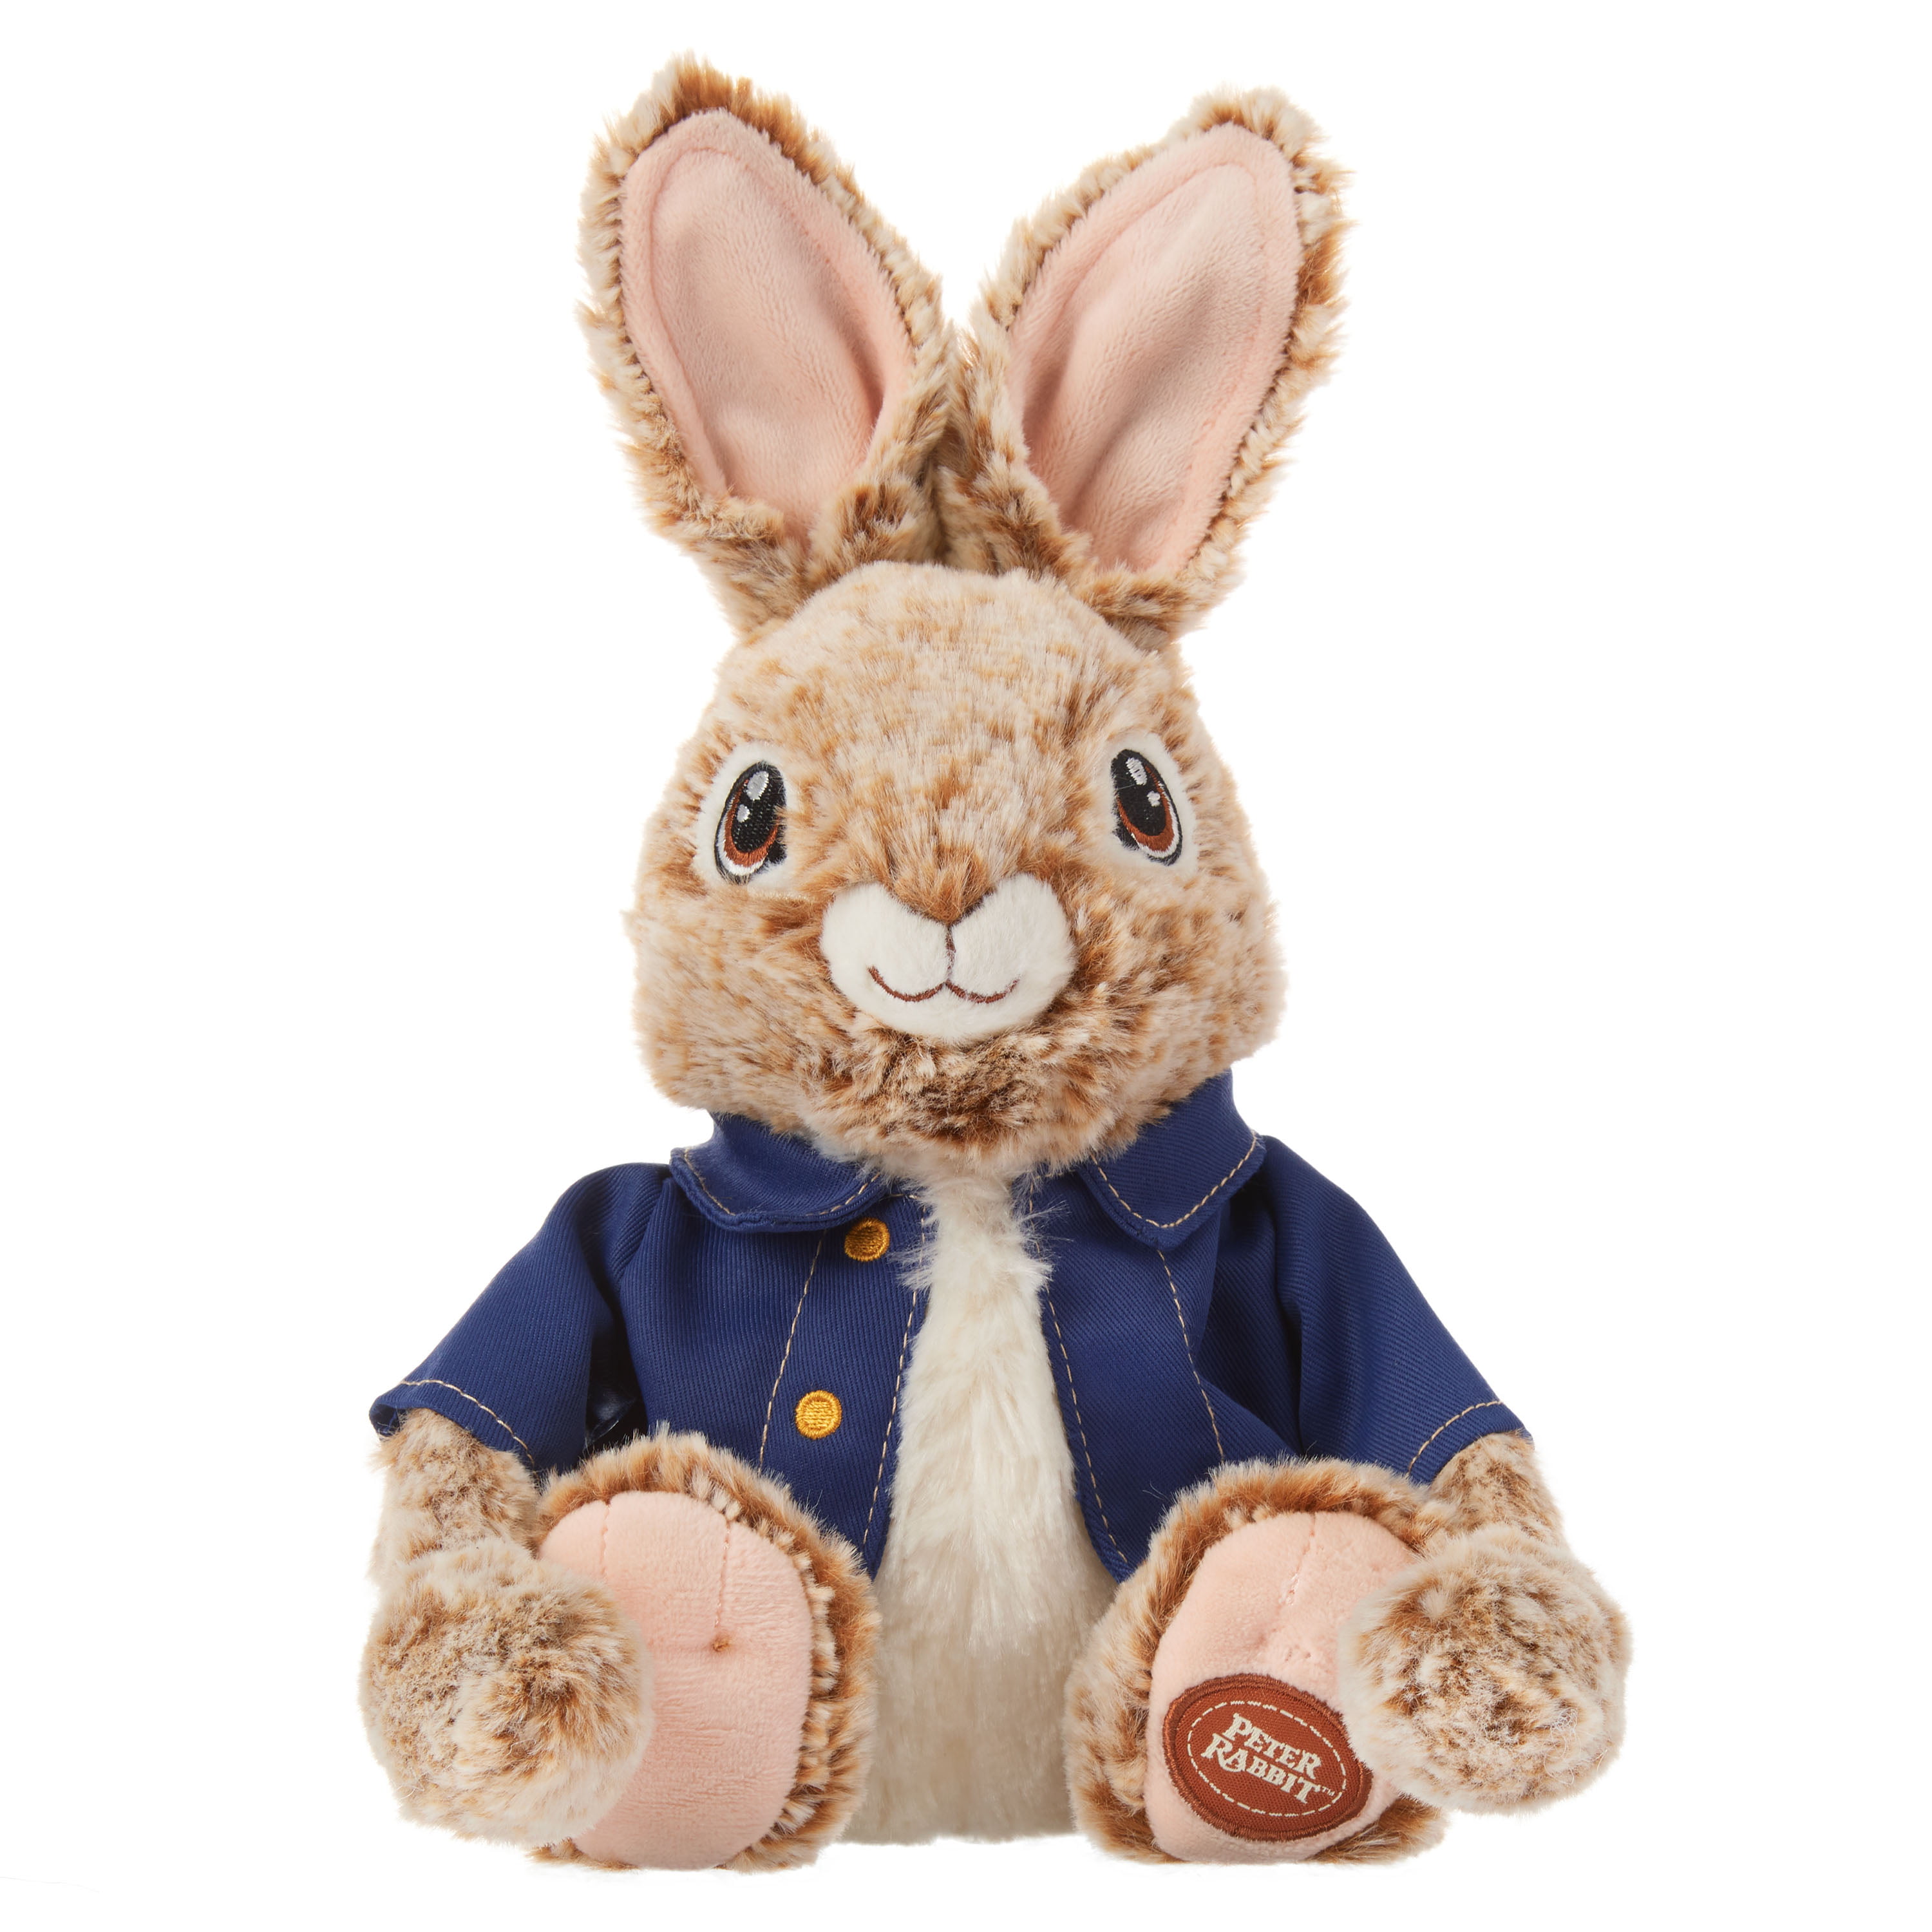 Peter Rabbit Animated Somersaulting Easter Plush Toy 